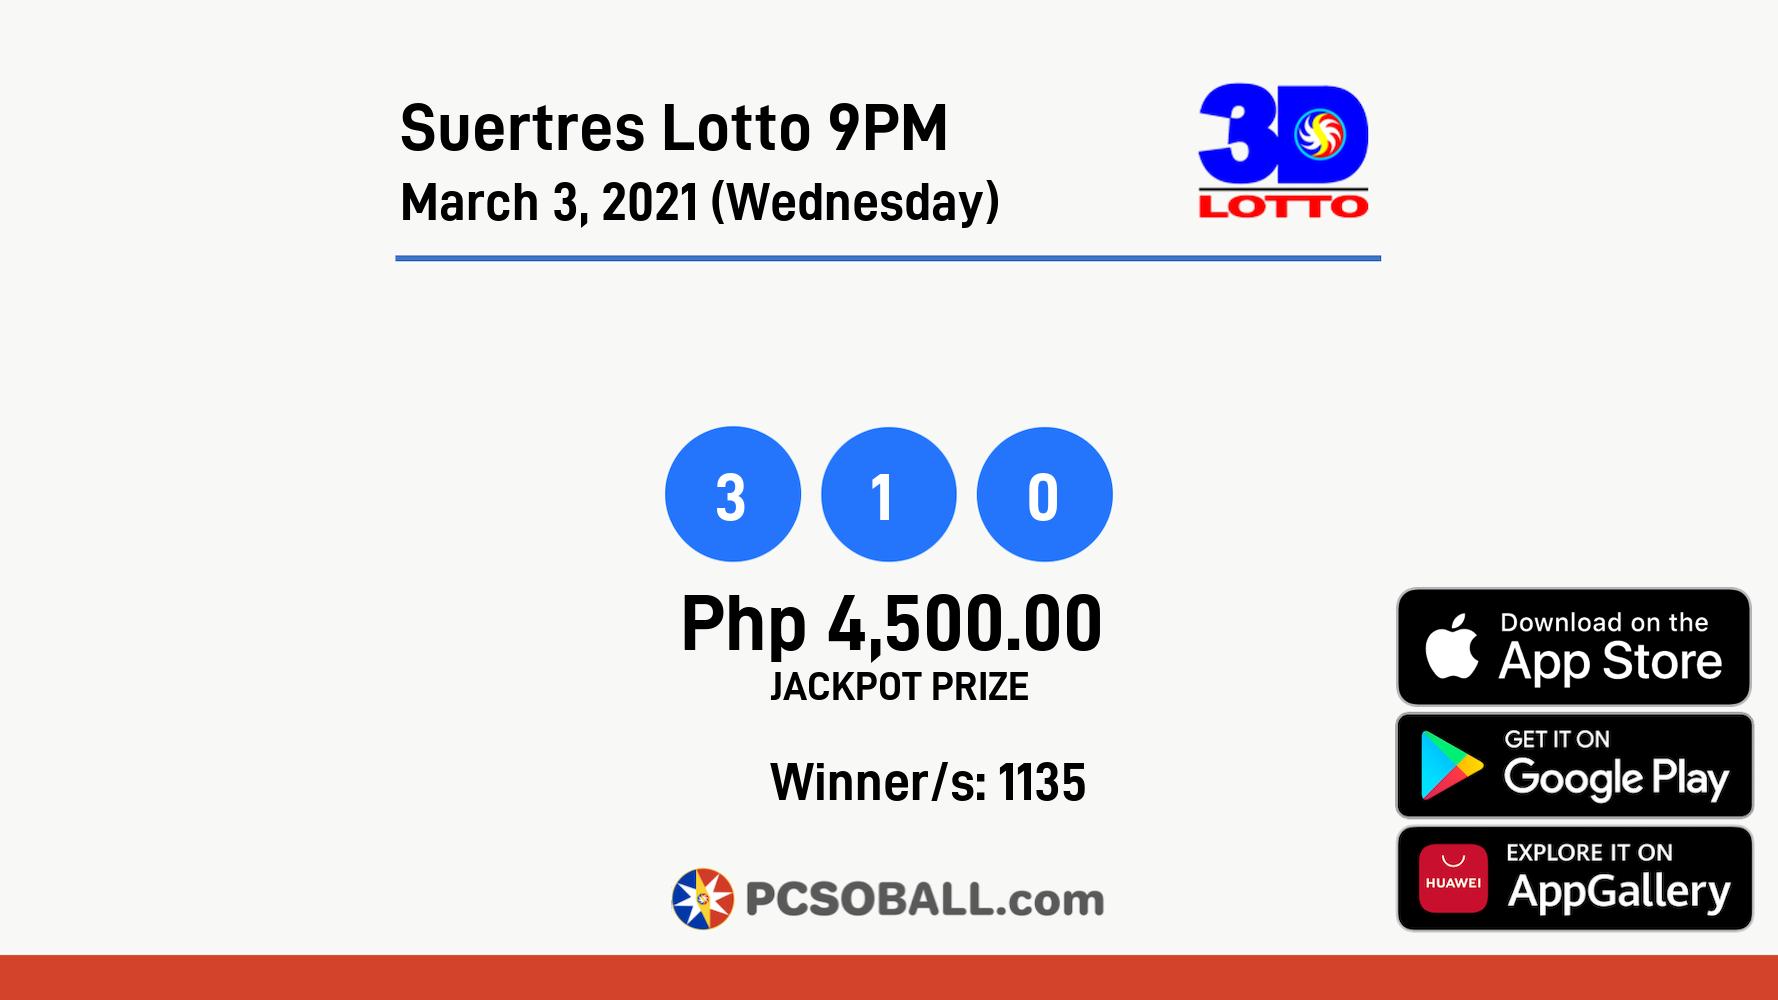 Suertres Lotto 9PM March 3, 2021 (Wednesday) Result